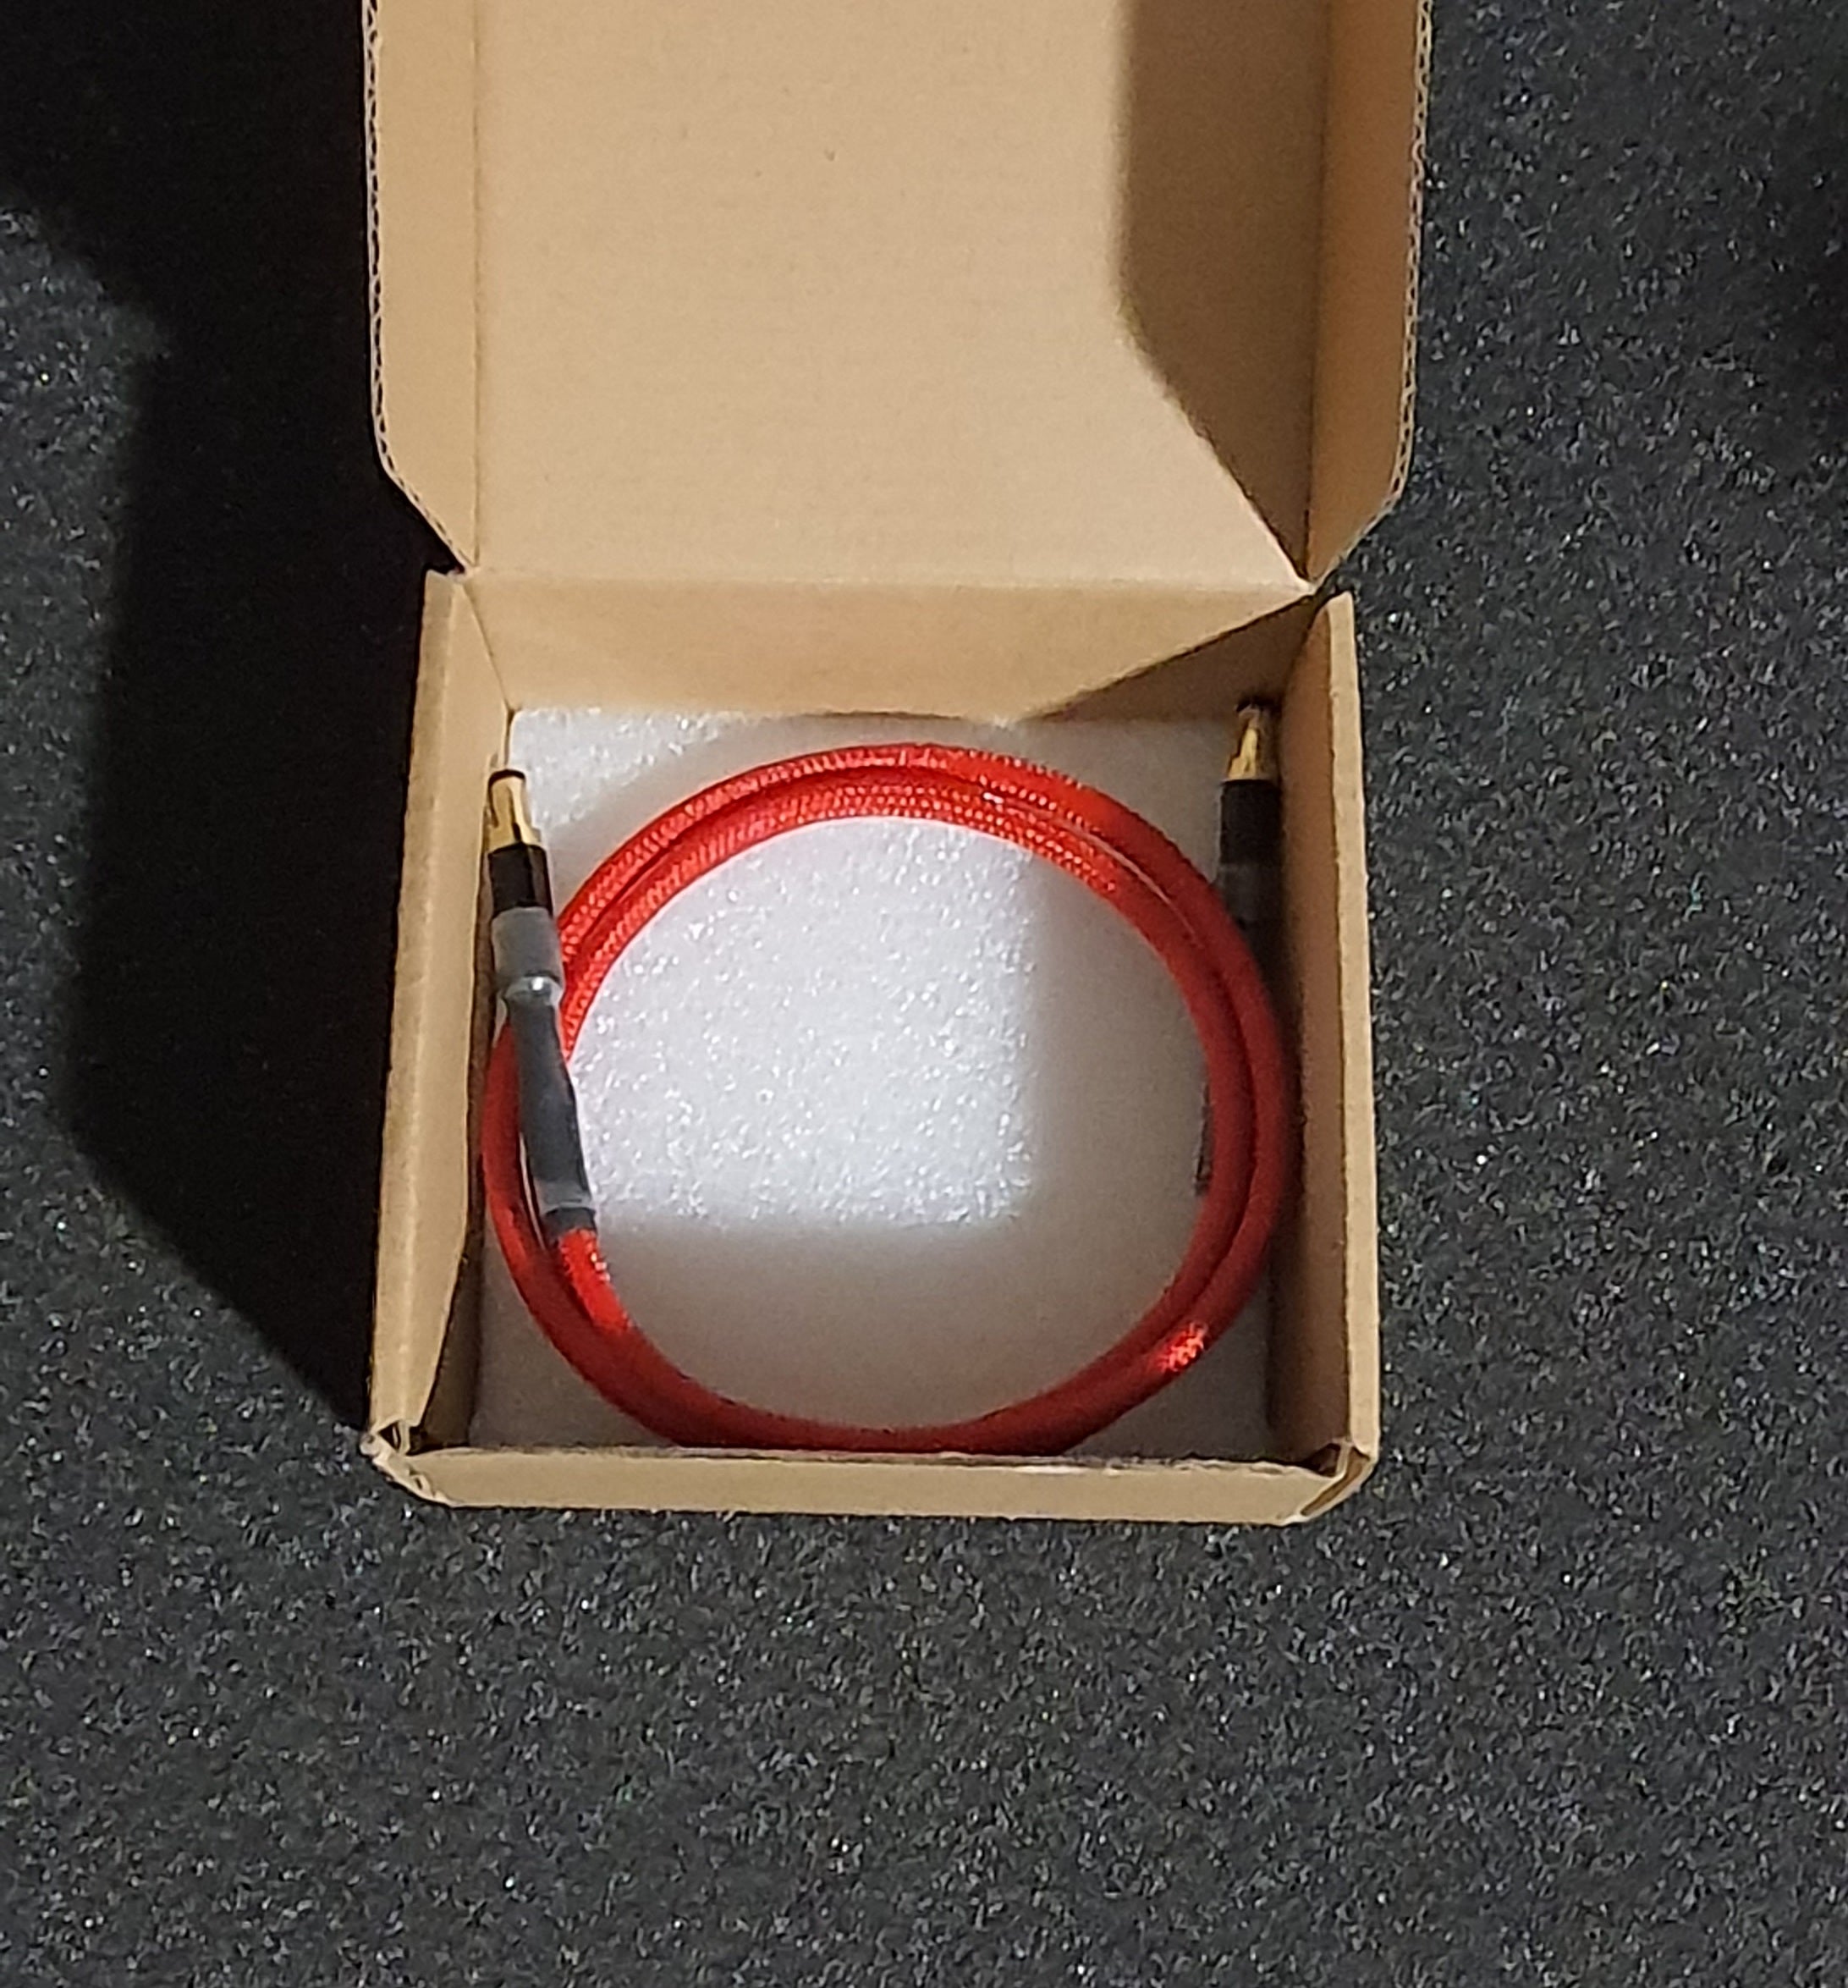 Red-Series Audiophile DC Power Cable